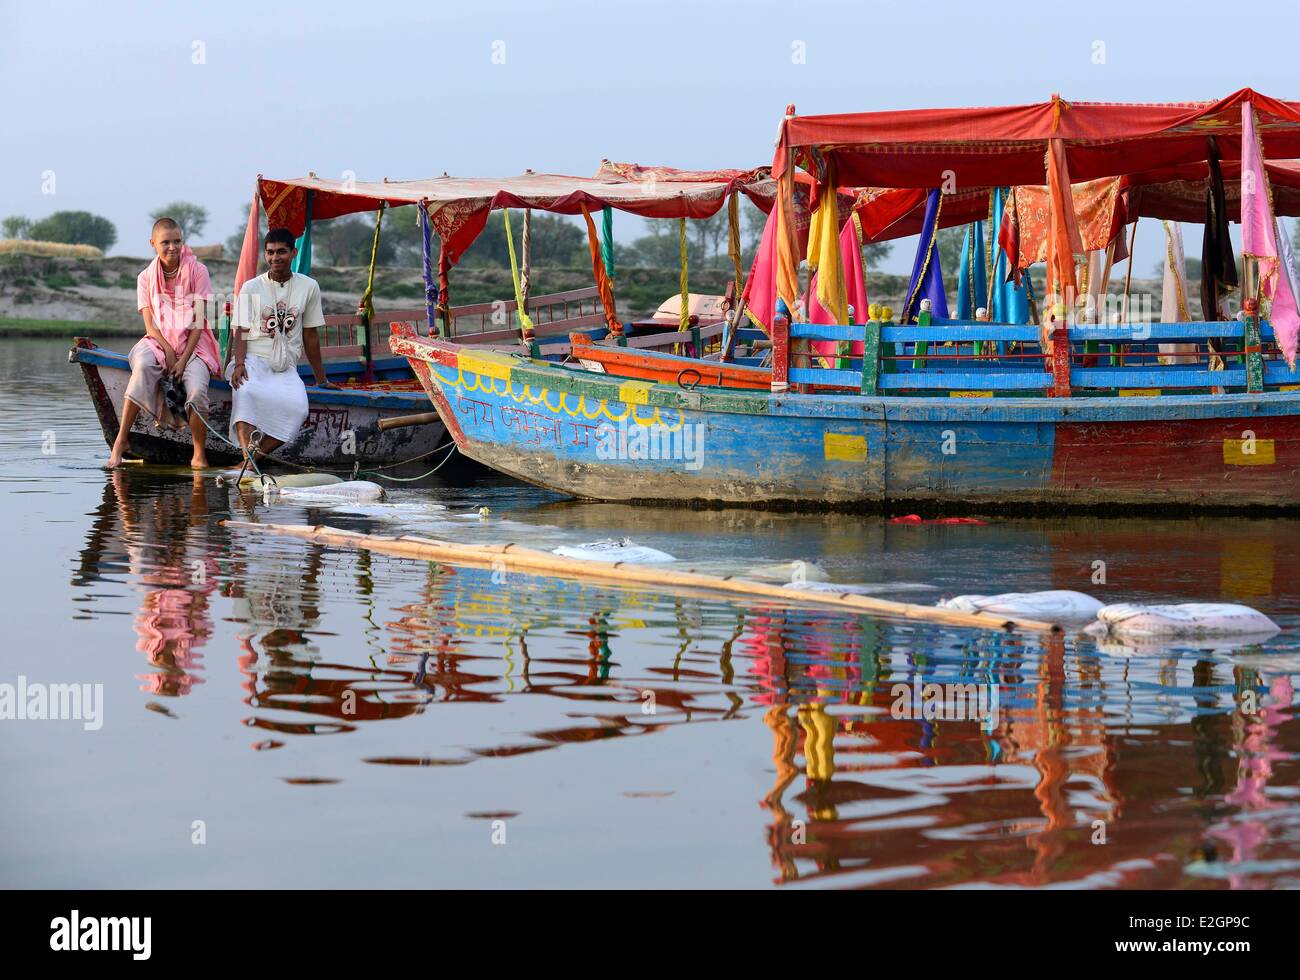 India Uttar Pradesh State Mathura young woman and young man having rest on a boat across river during Holi festival celebrations Stock Photo